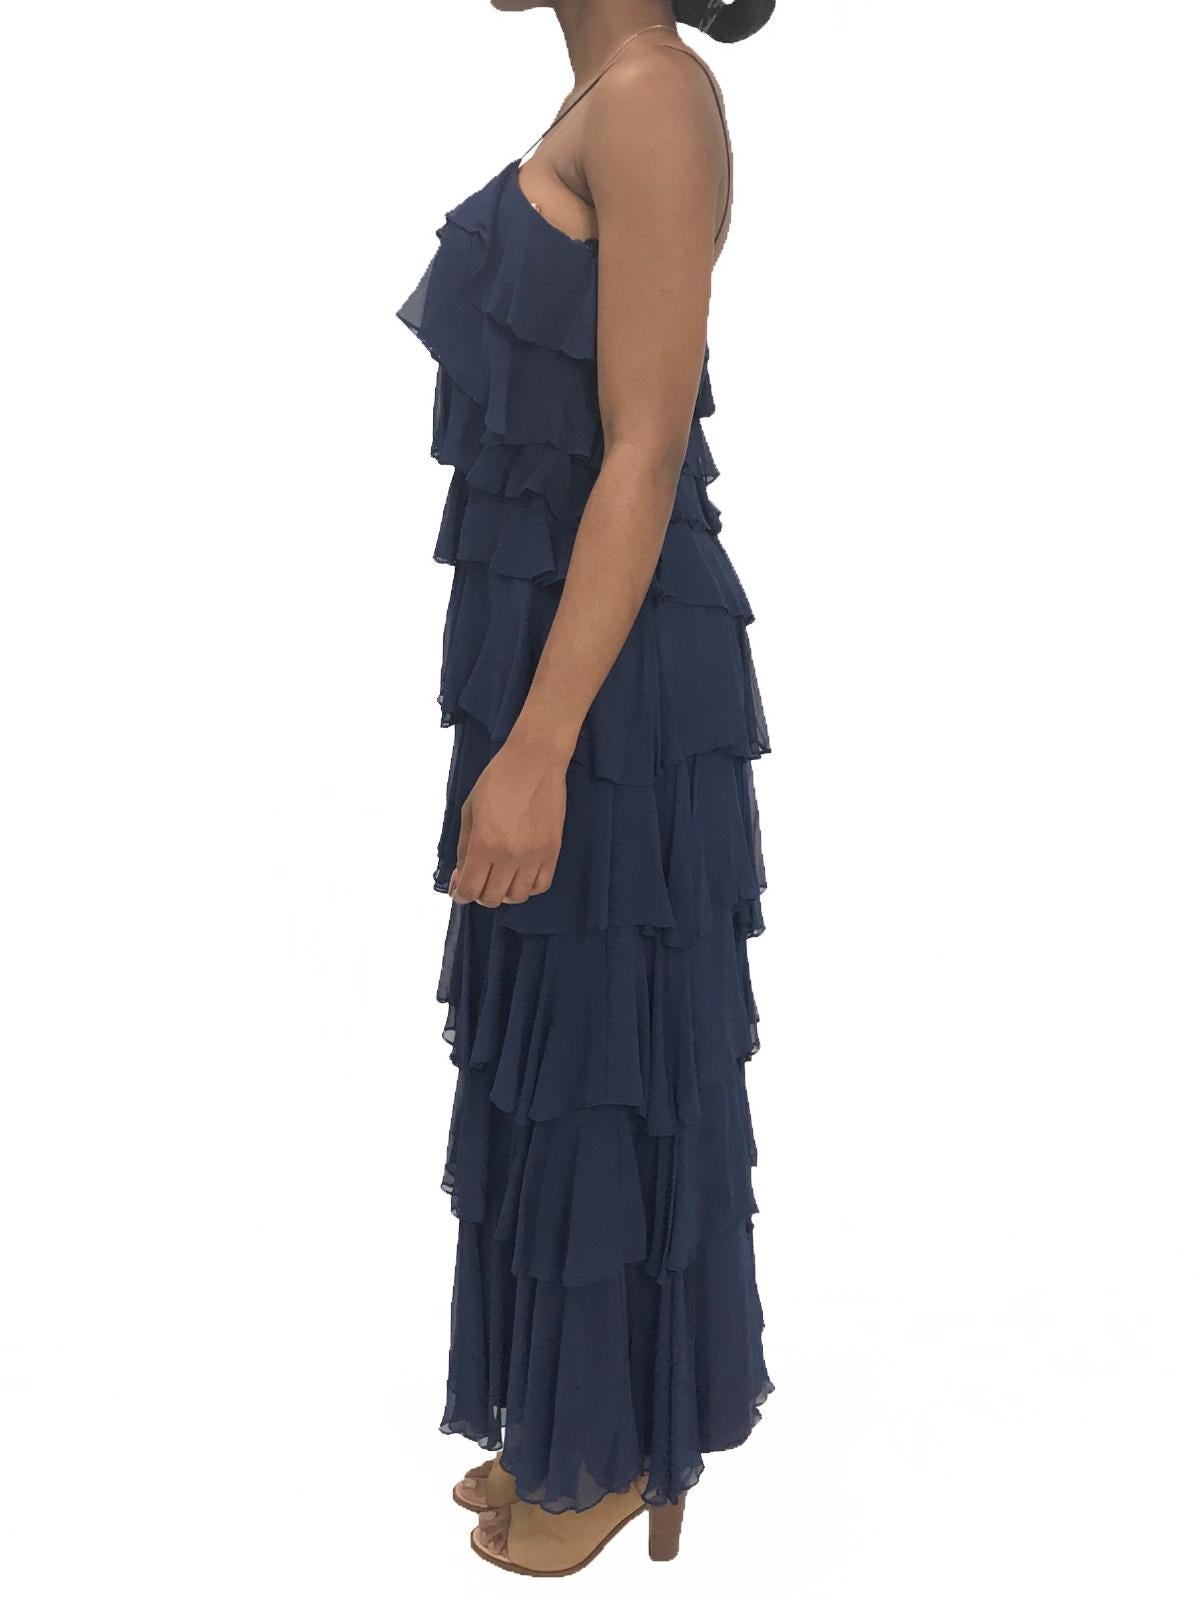 1970S SAKS 5TH AVENUE Navy Silk Chiffon Ruffled Gown In Excellent Condition For Sale In New York, NY